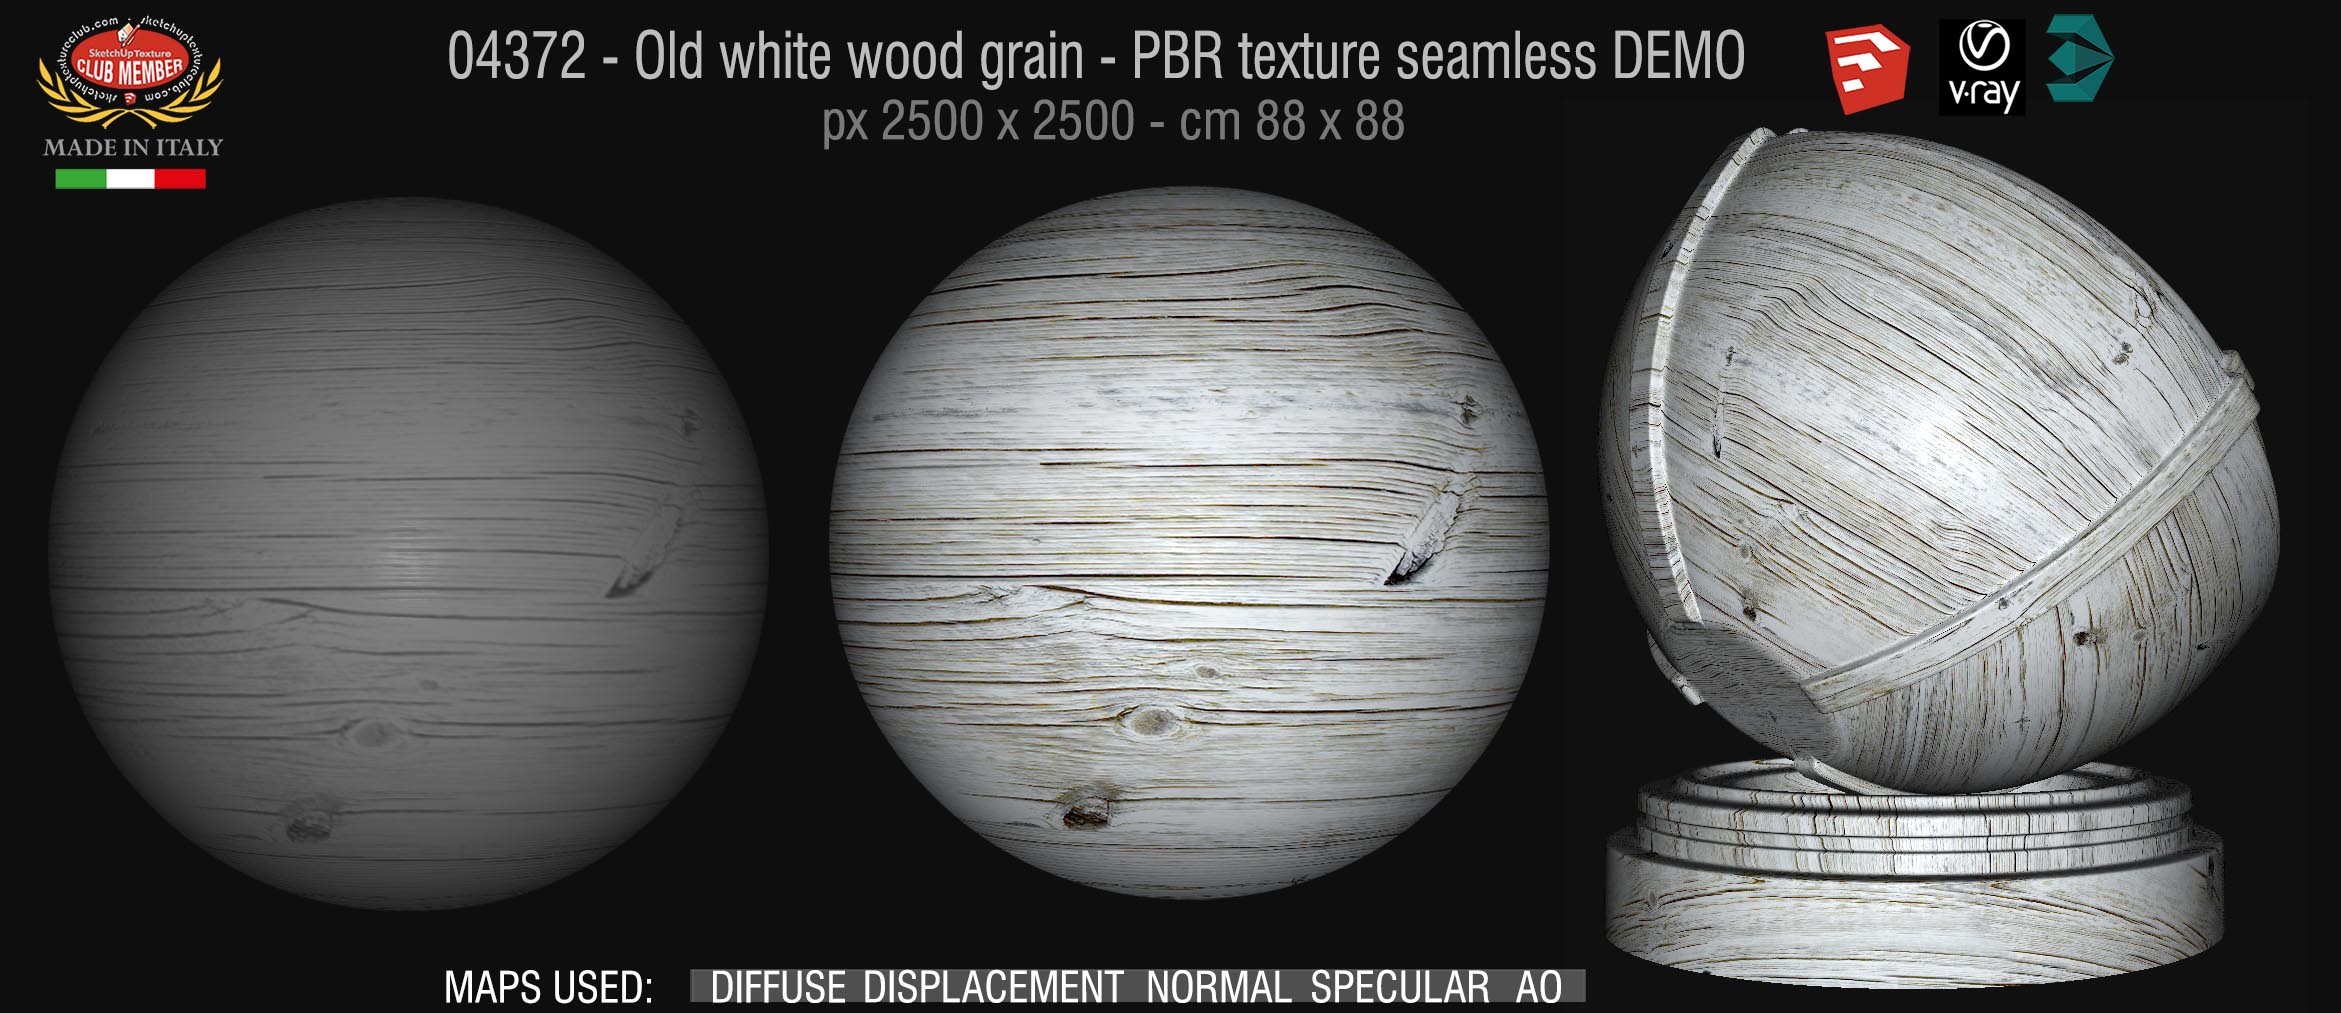 04372 Old white wood grain - PBR texture seamless DEMO